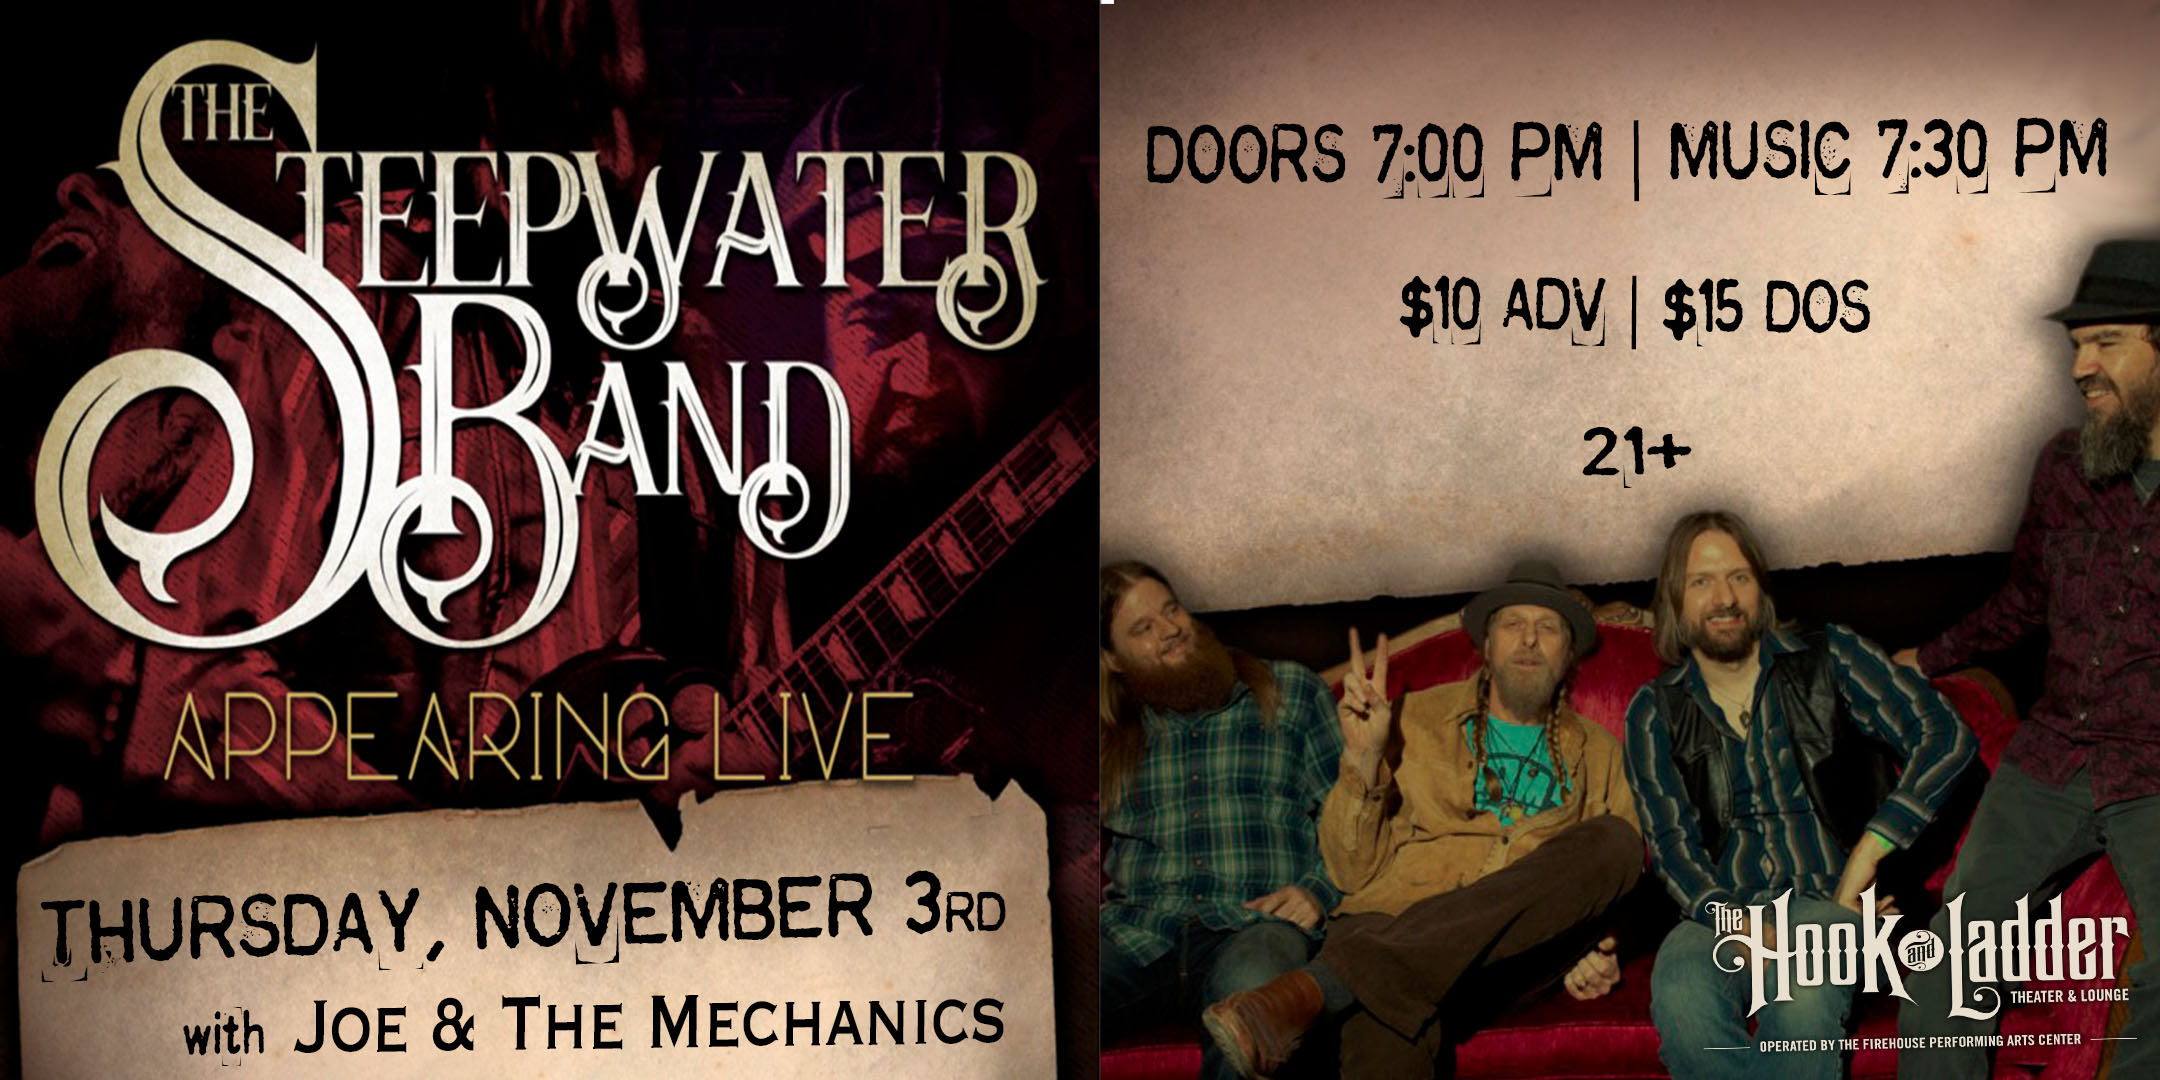 The Steepwater Band “Re-Turn Of The Wheel” Album Release plus Joe & The Mechanics Thursday, November 3, 2021 The Hook & Ladder Theater Doors 7:00pm :: Music 7:30pm :: 21+ Ticket Prices (all GA): $10 Advance $15 DOS